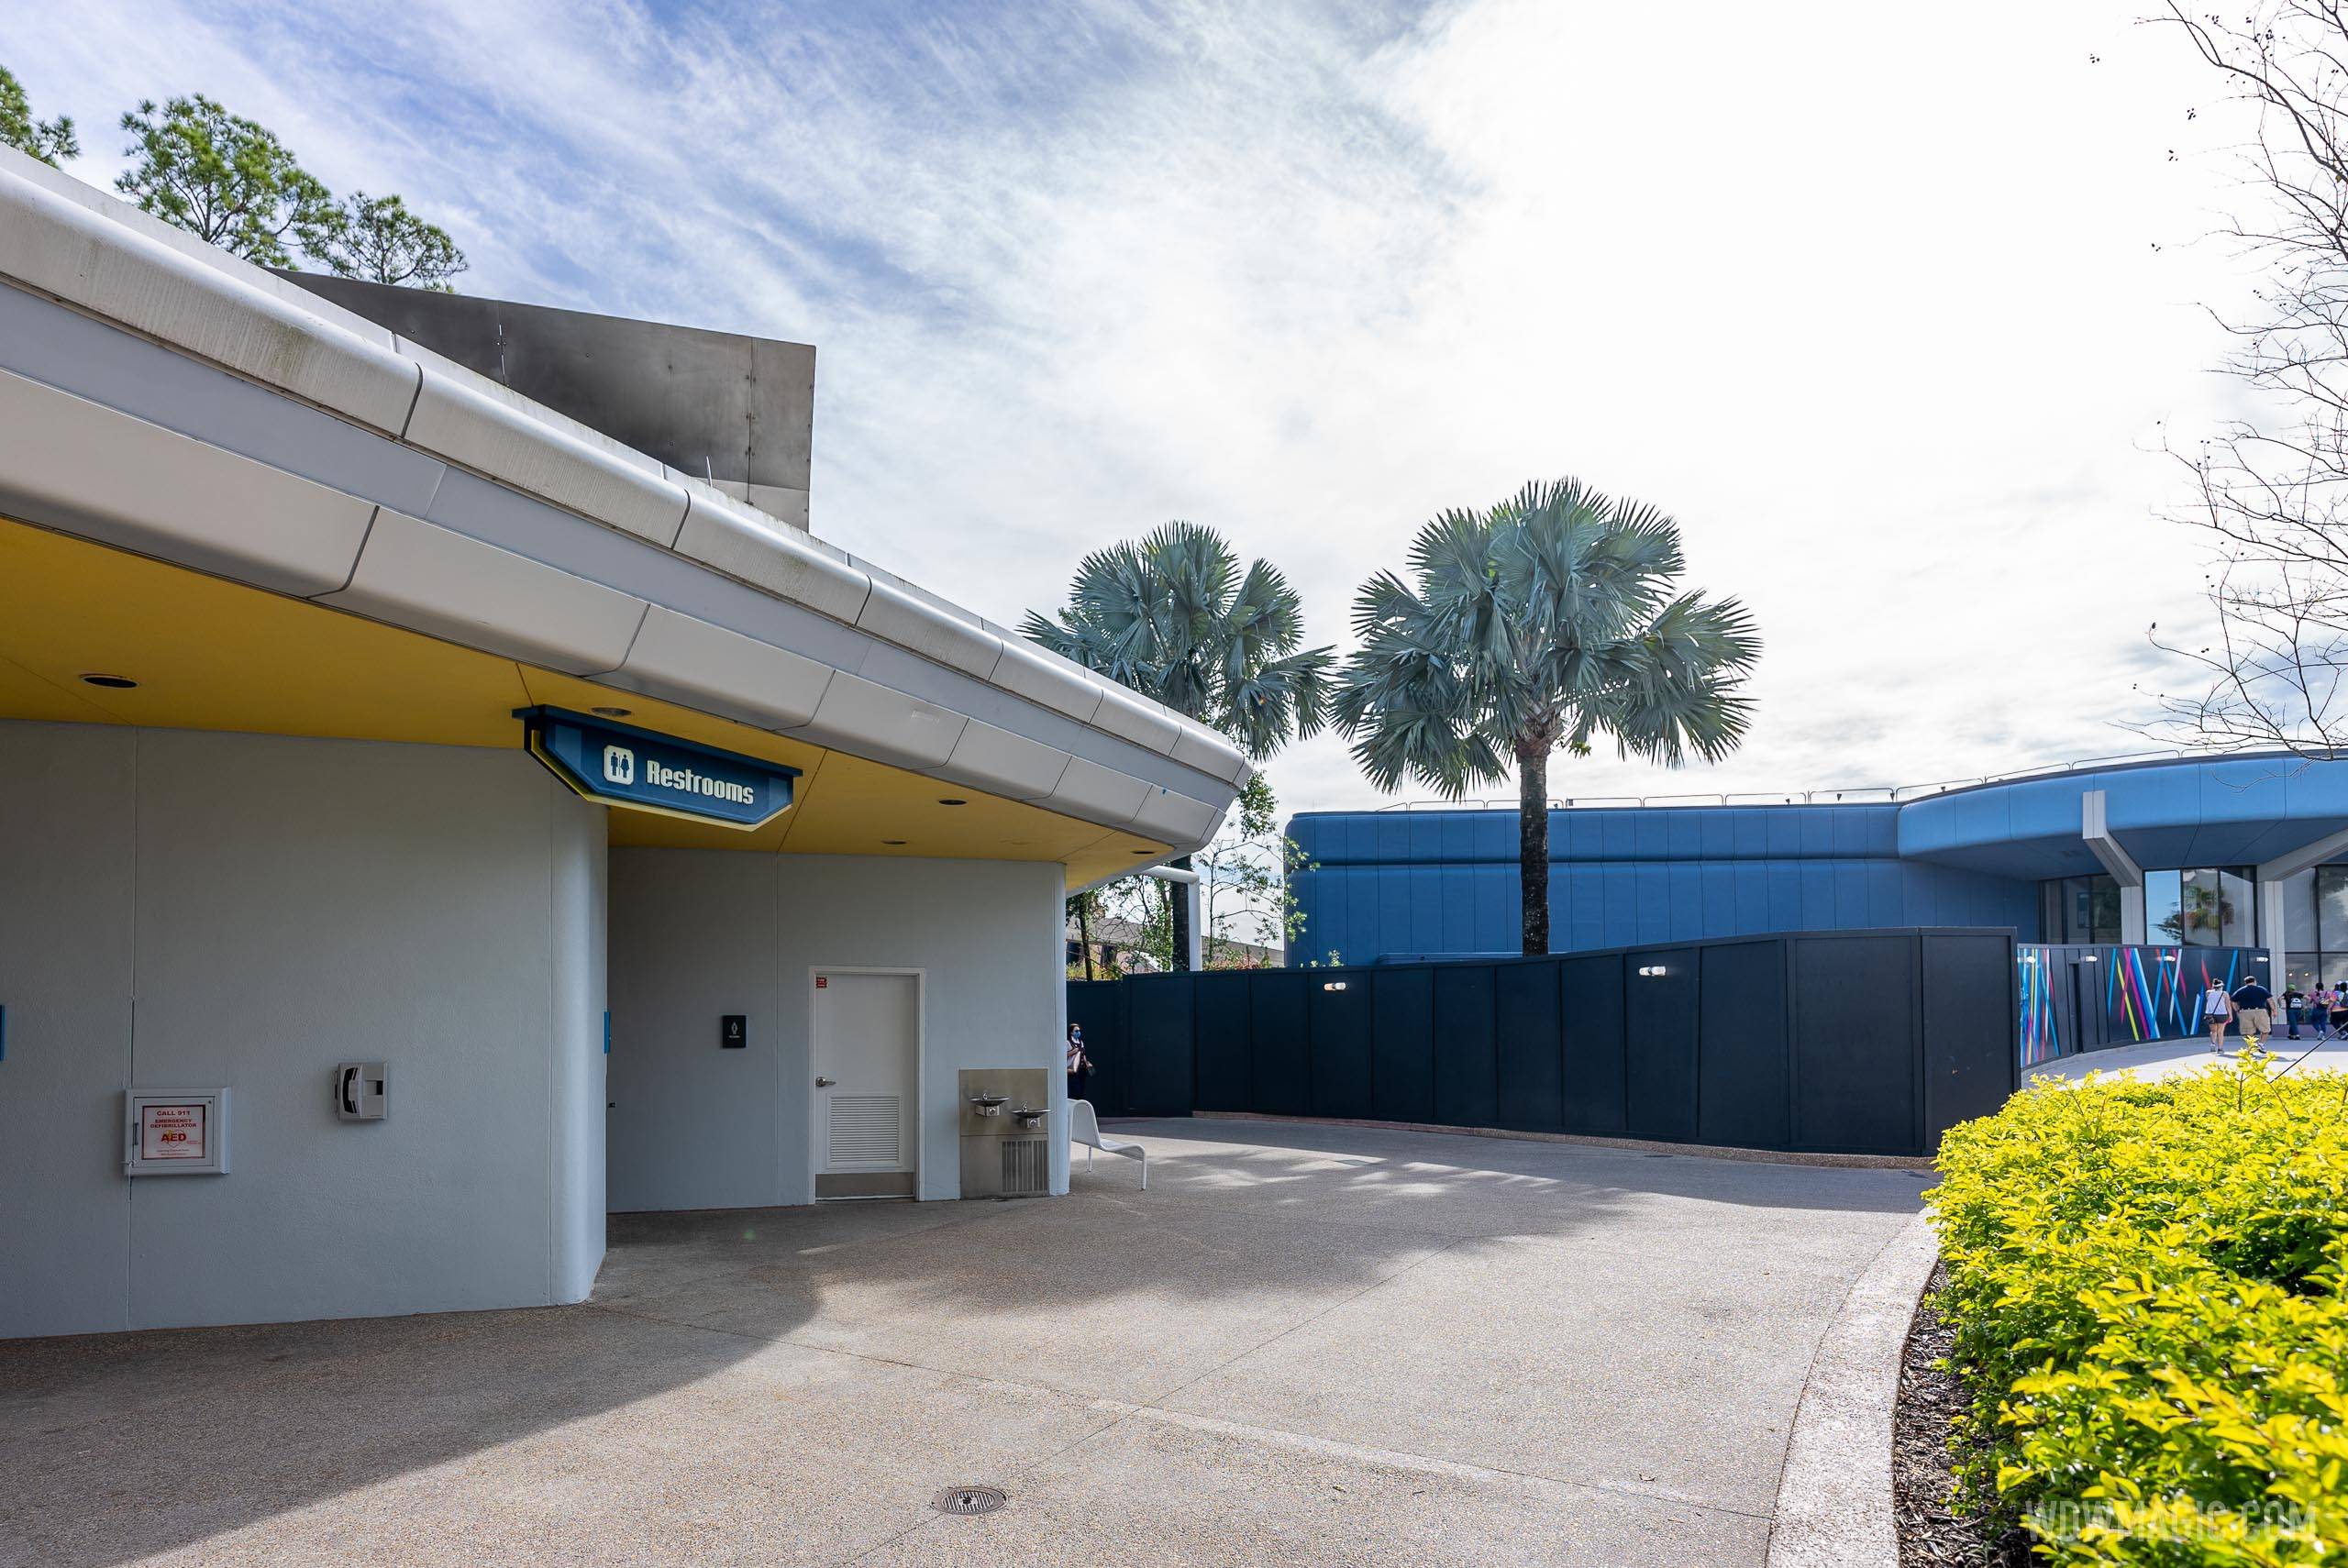 Future World East restrooms beneath Spaceship Earth reopen from refurbishment